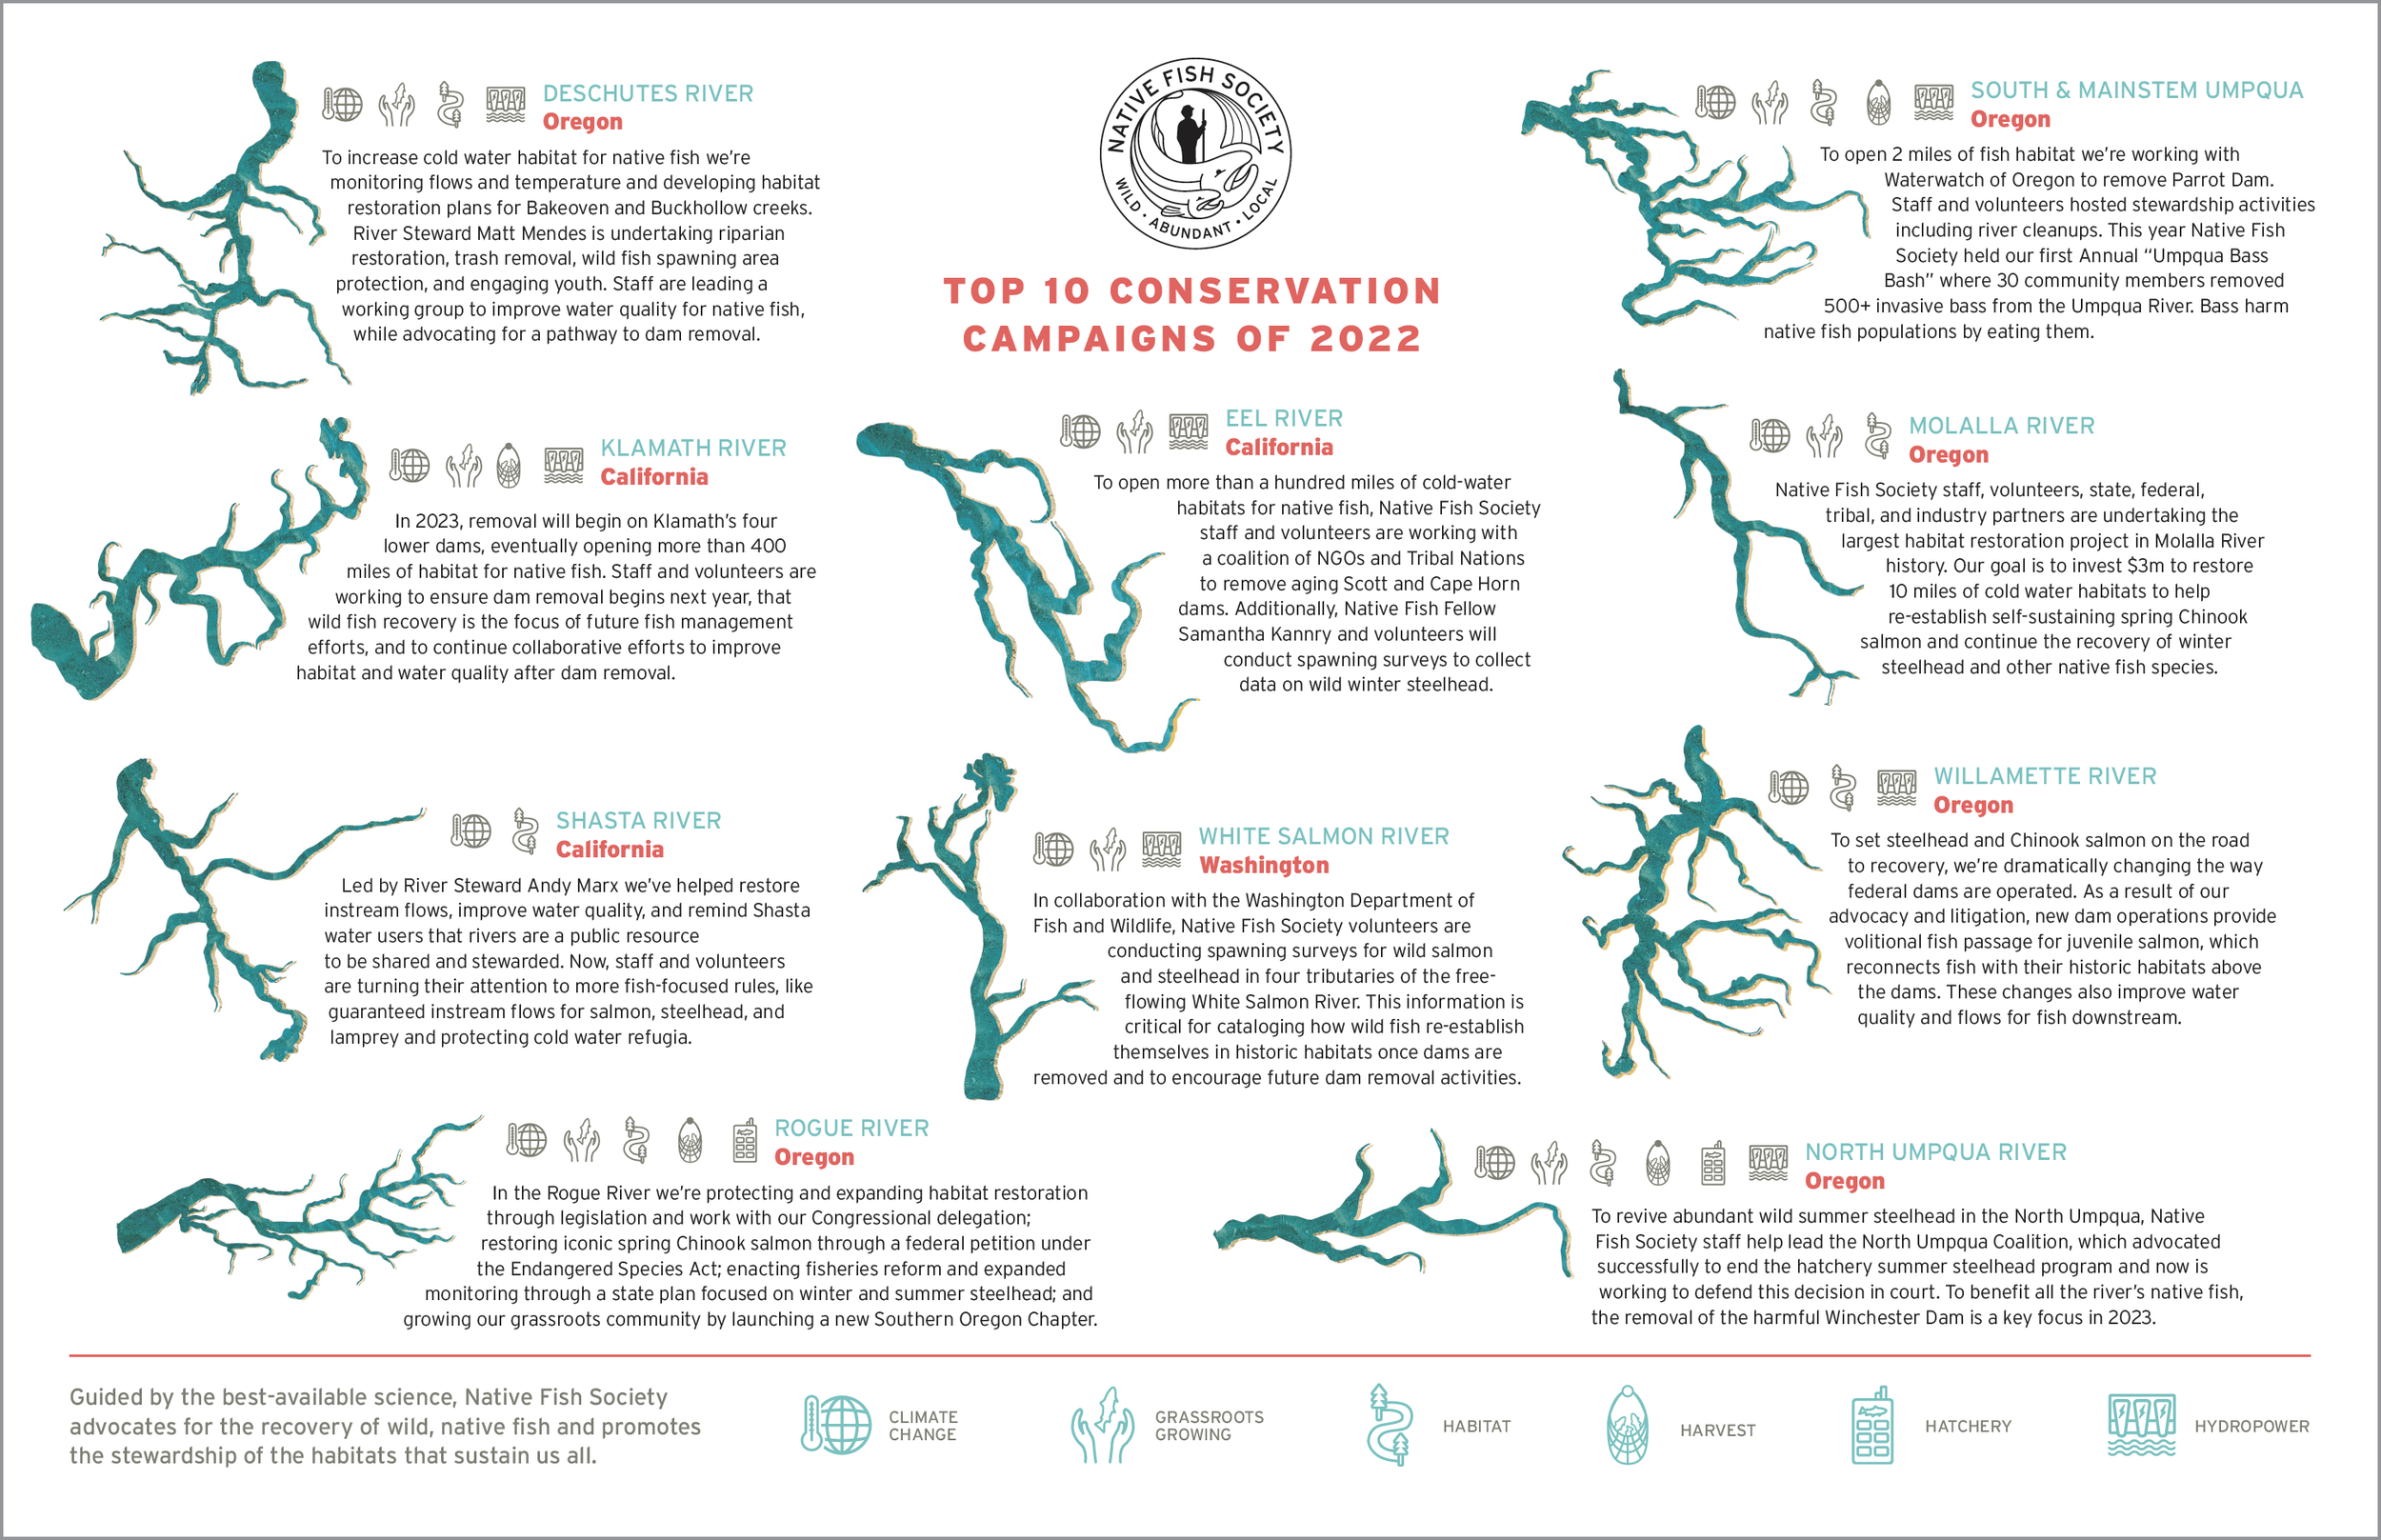 Silhouette illustration of 10 different rivers on a textured teal background